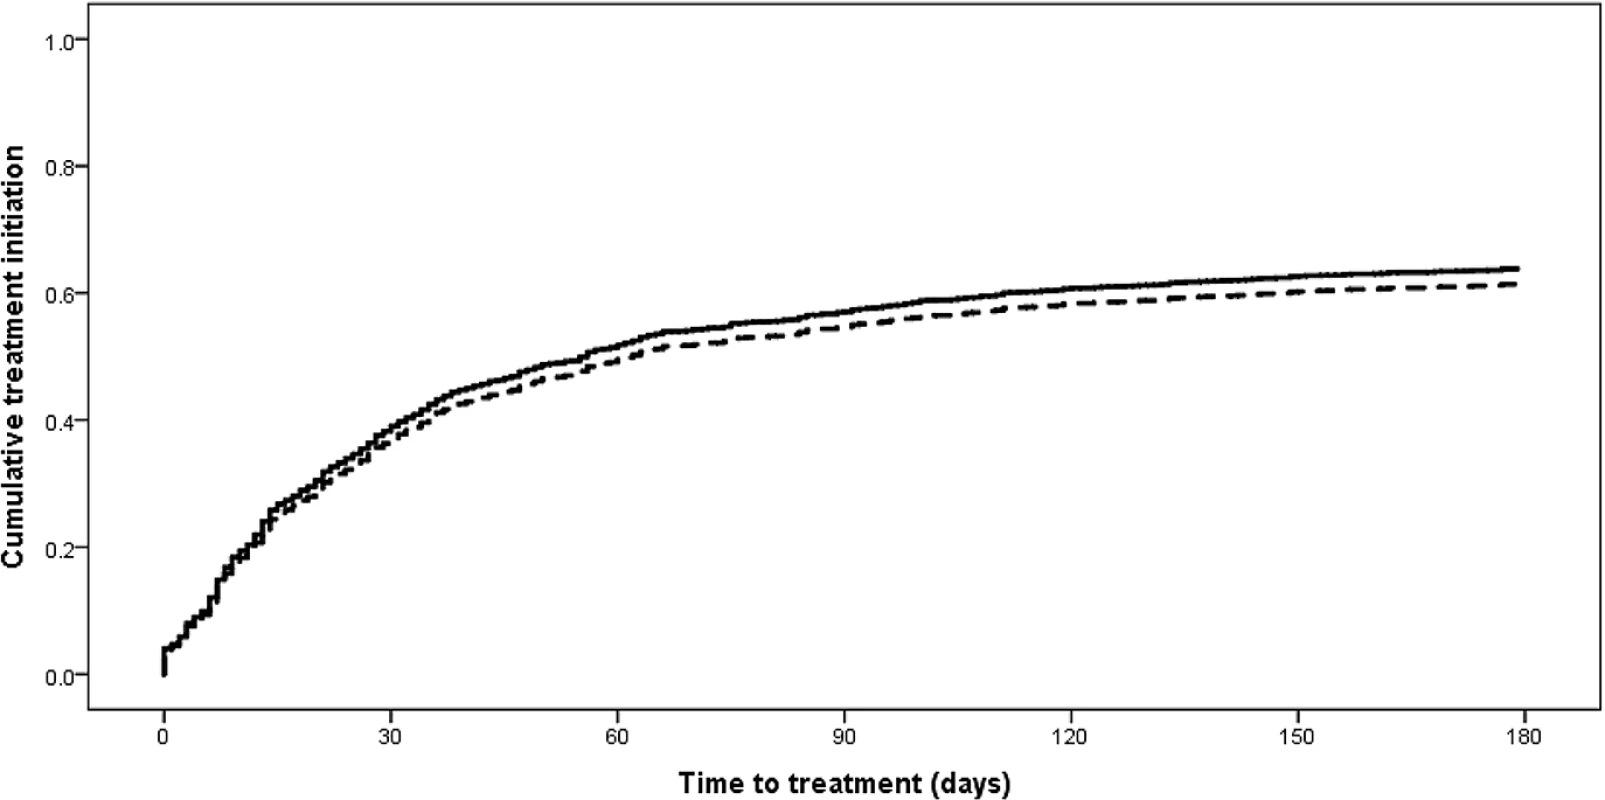 Time to treatment initiation from diagnostic specimen for new rifampicin-resistant tuberculosis patients in the 2013 cohort diagnosed with Xpert compared to other methods (<i>p &lt;</i> 0.001).